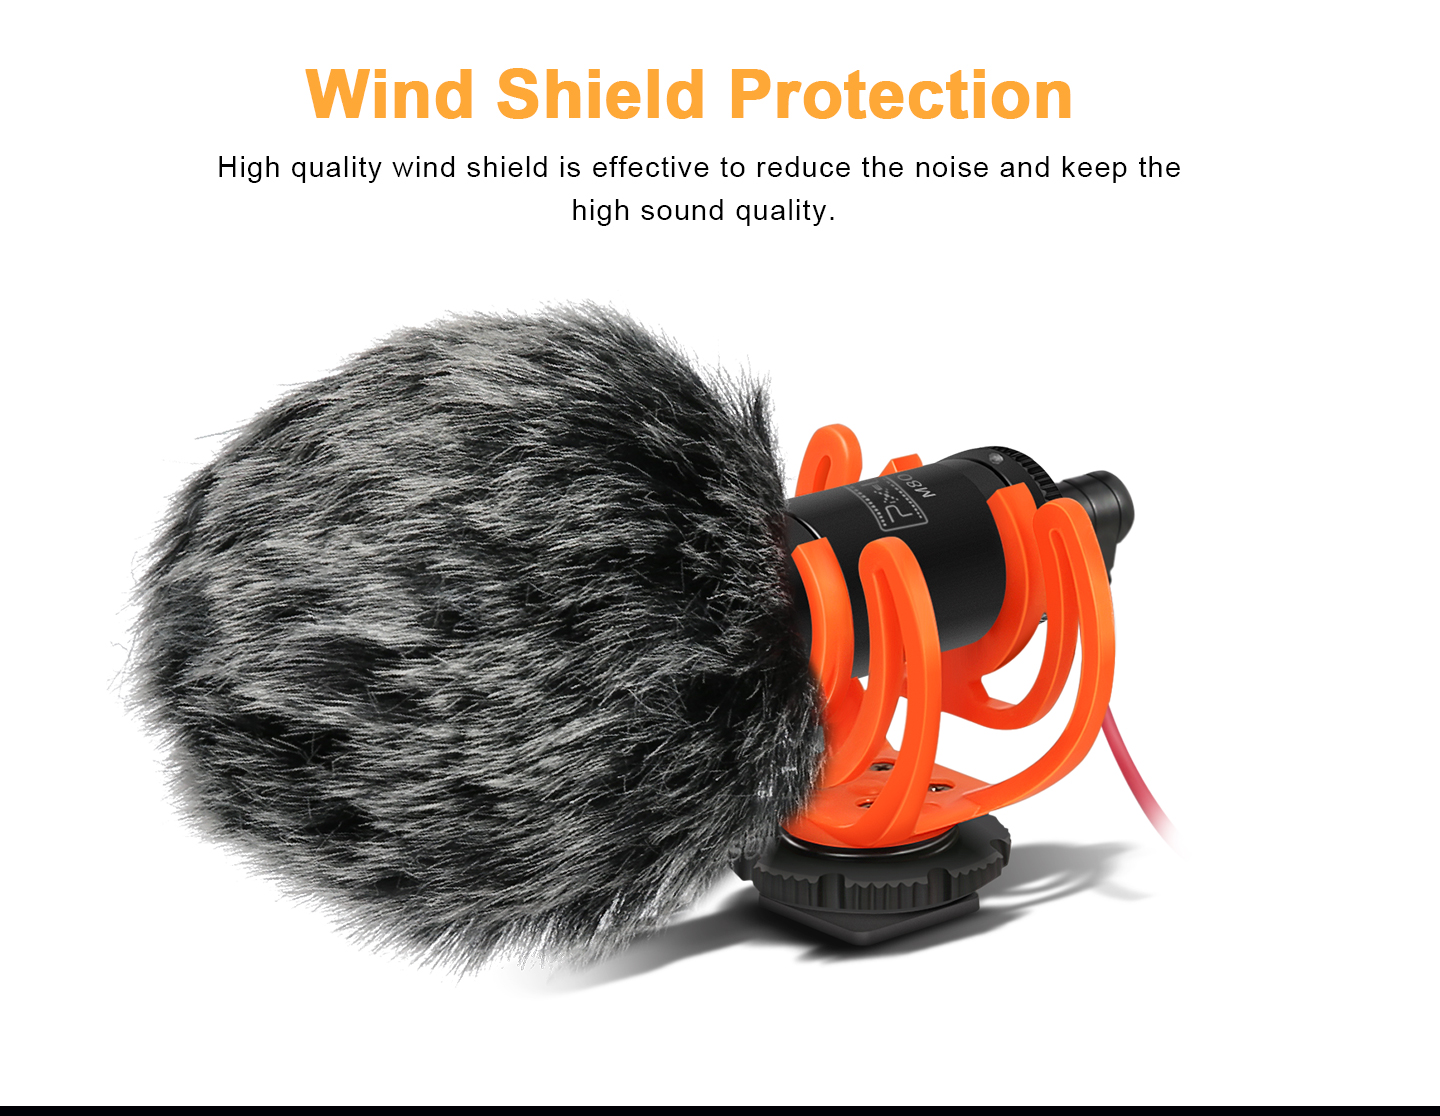 Wid Shield Protection